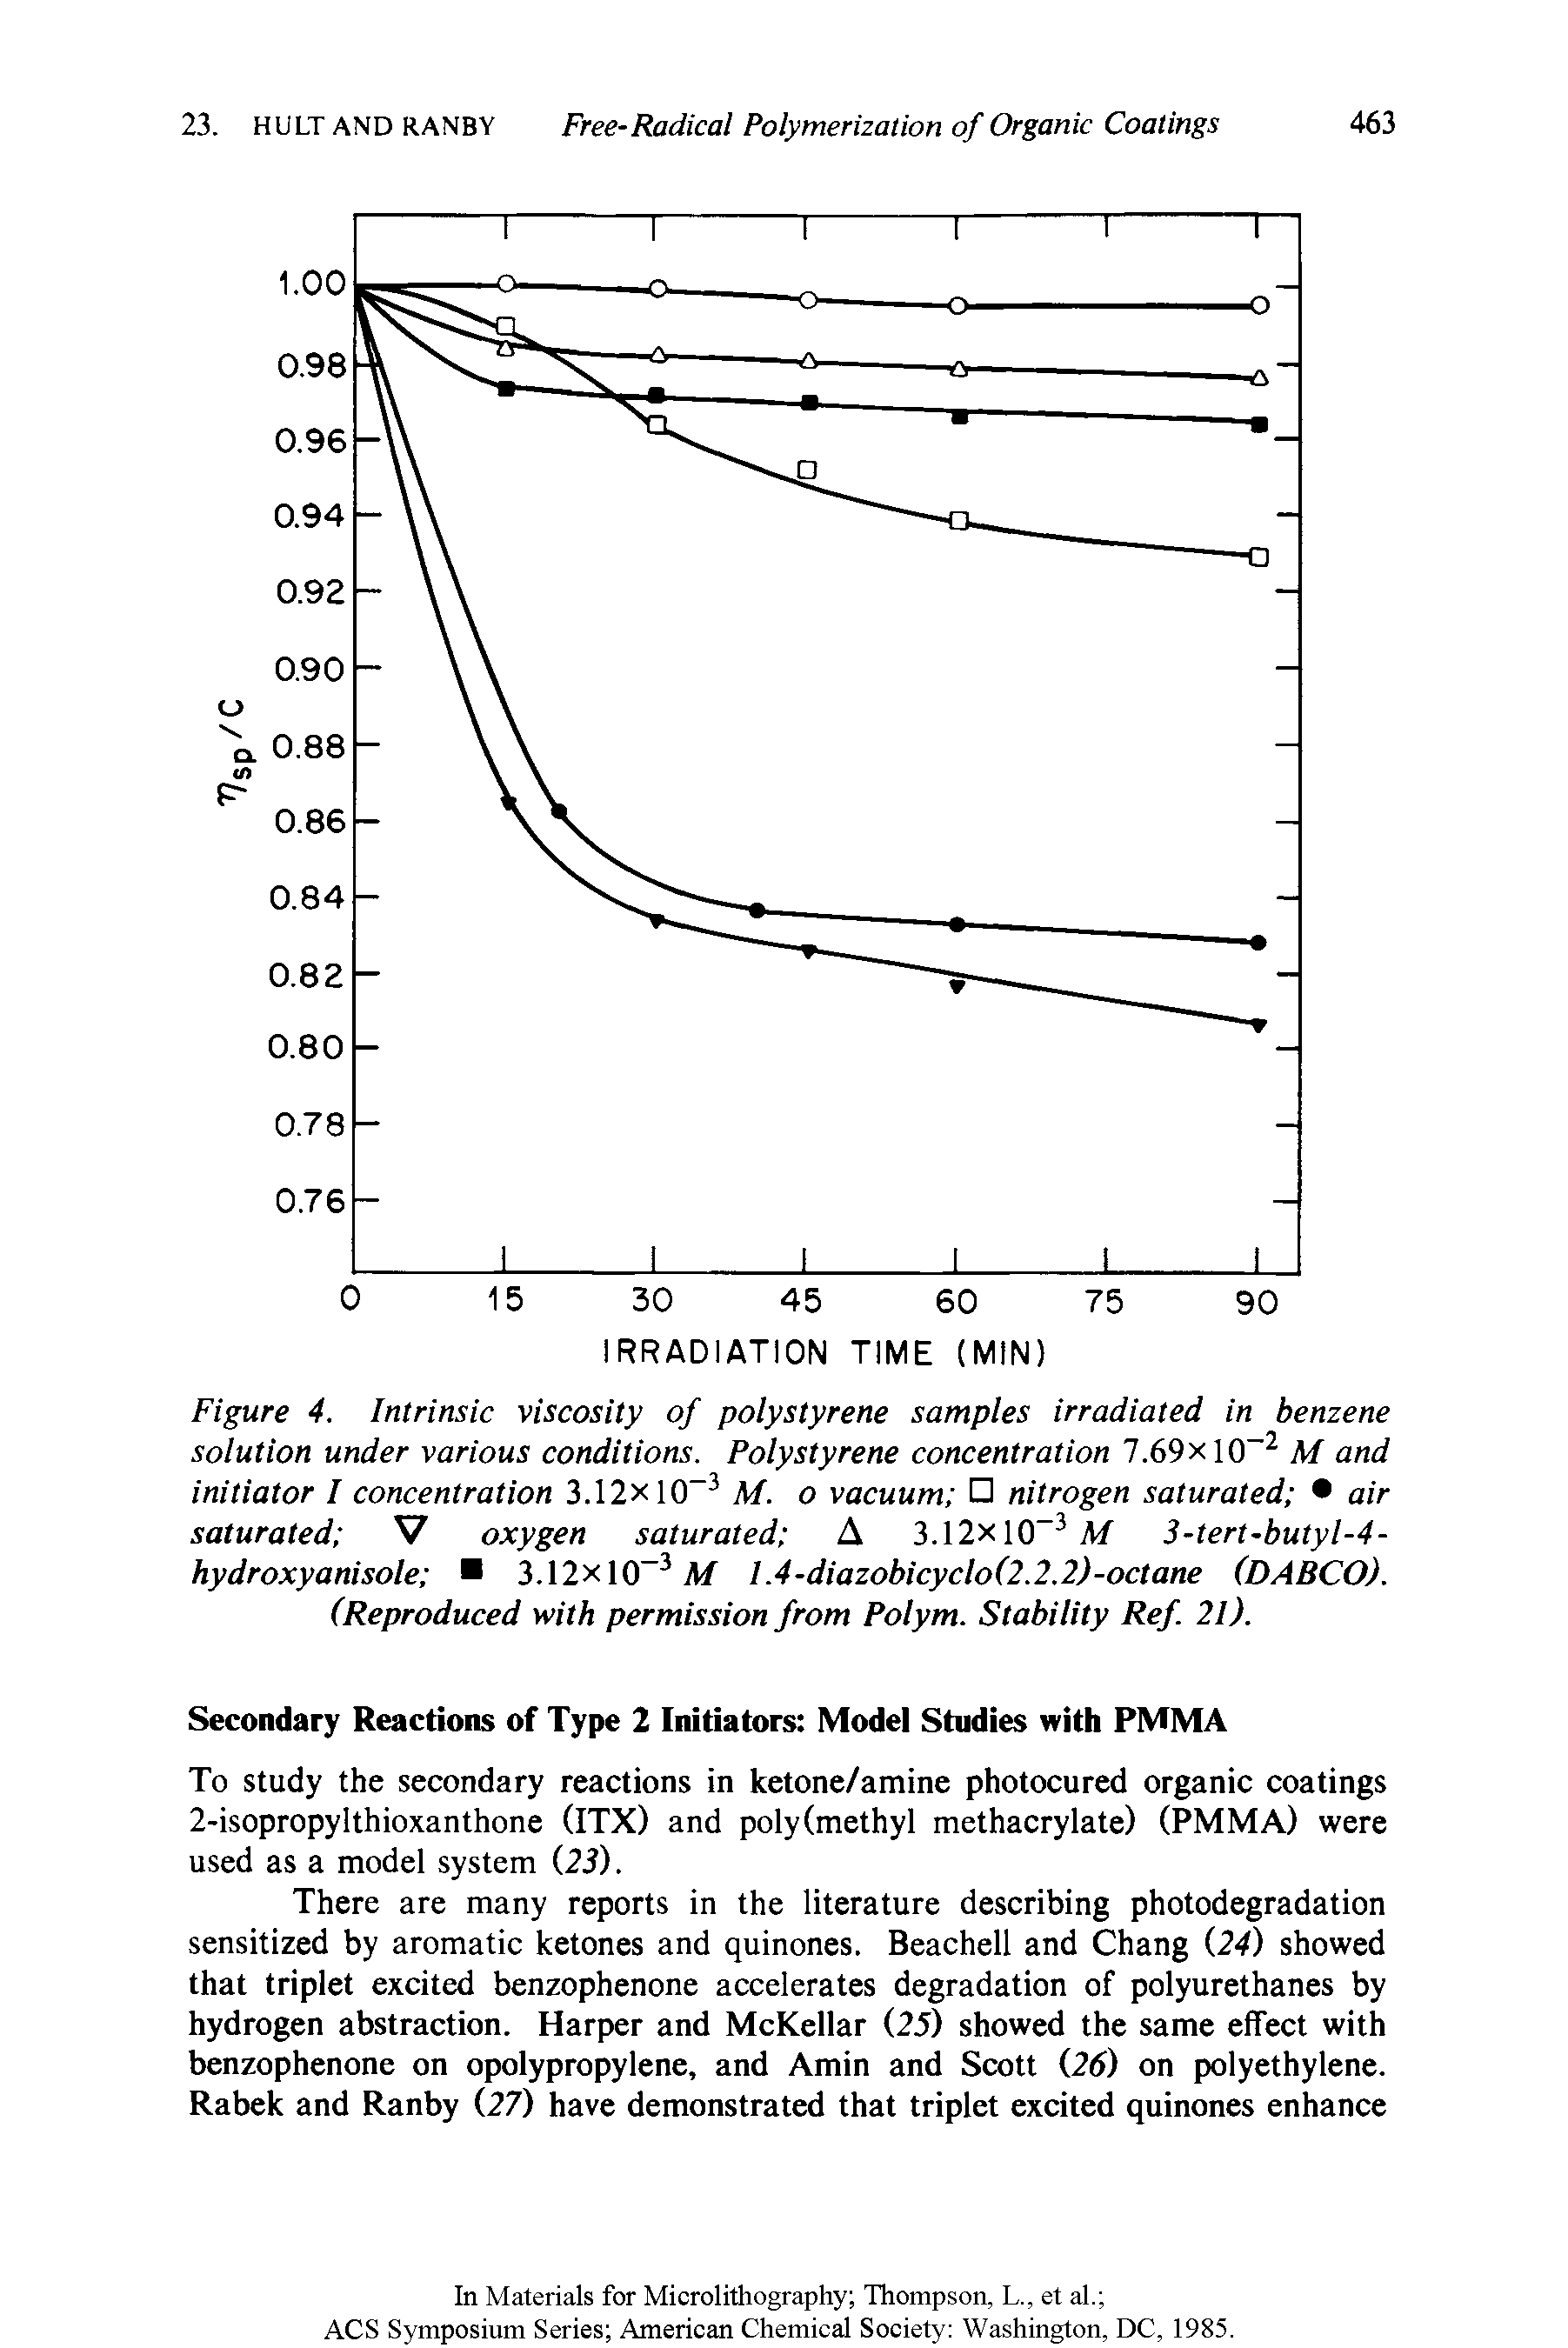 Figure 4. Intrinsic viscosity of polystyrene samples irradiated in benzene solution under various conditions. Polystyrene concentration 7.69x 10-2 M and initiator I concentration 3.12x 10-3 M. vacuum nitrogen saturated air saturated V oxygen saturated 3.12 3 / 3-tert-butyl-4-hydroxyanisole 3.12x 10-3 M 1.4-diazobicyclo(2.2.2)-octane (DABCO).